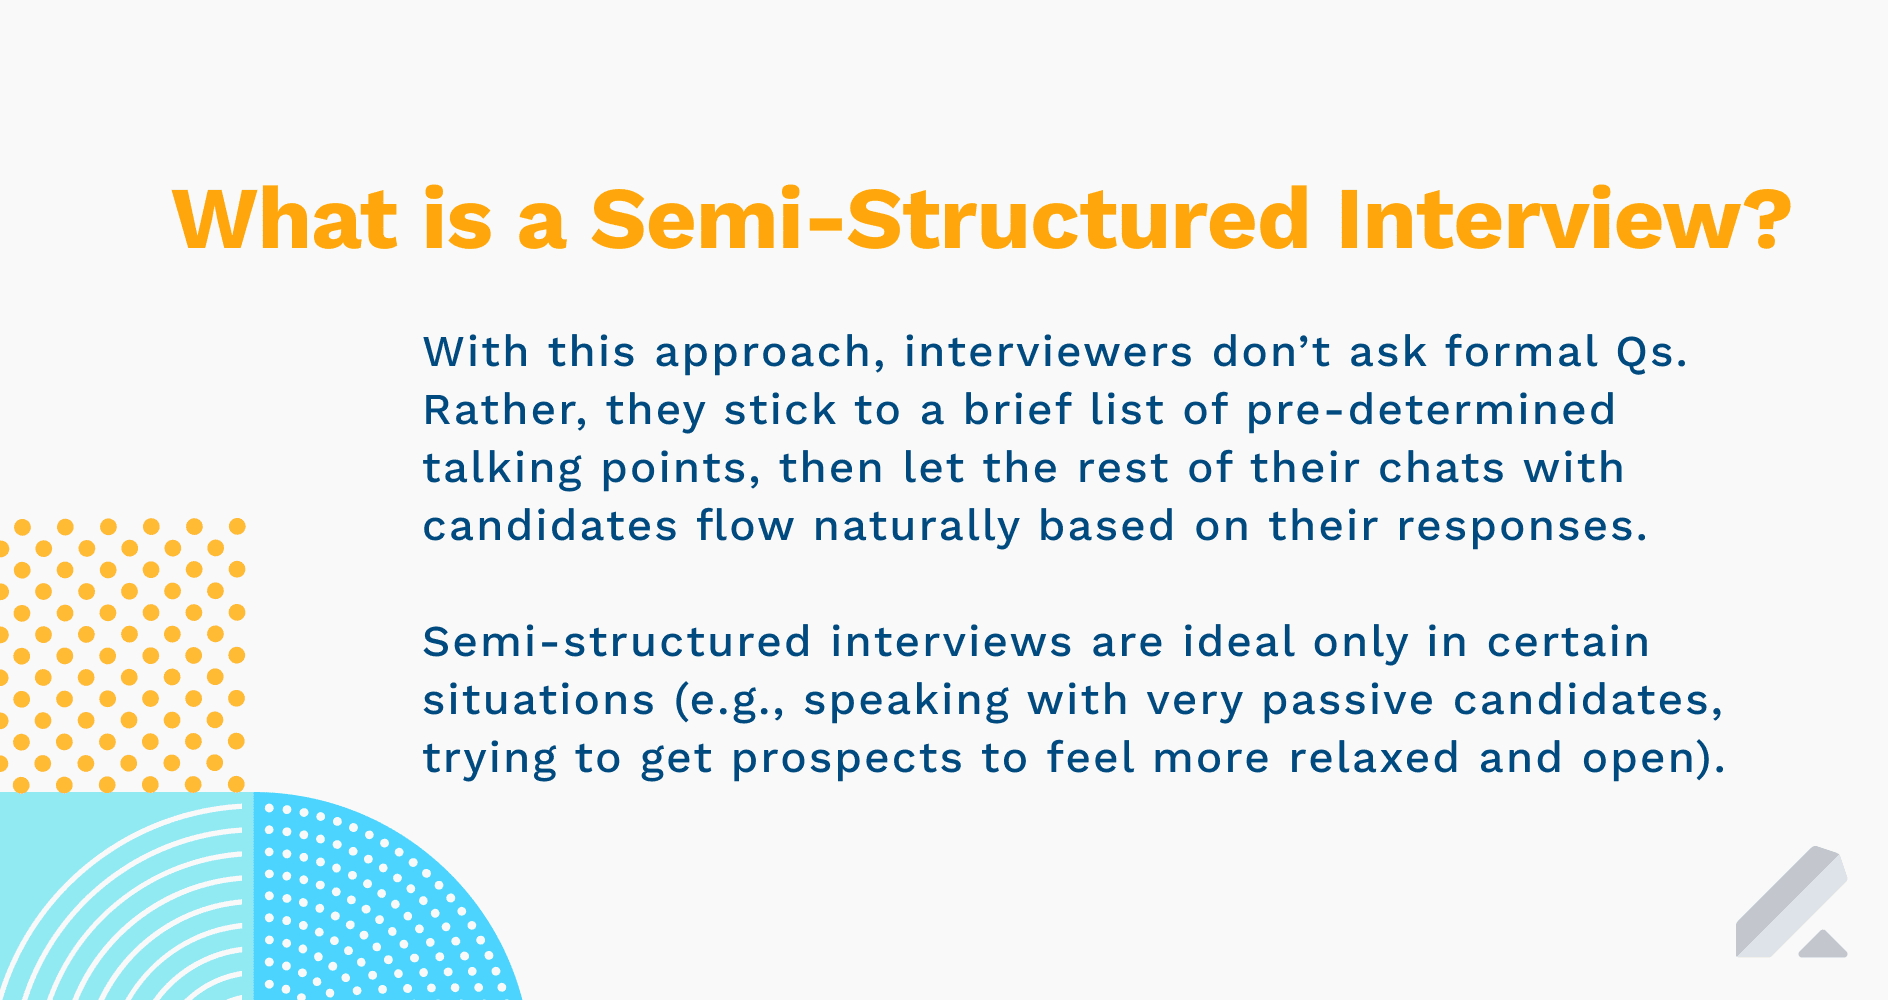 what is a semi-structured interview